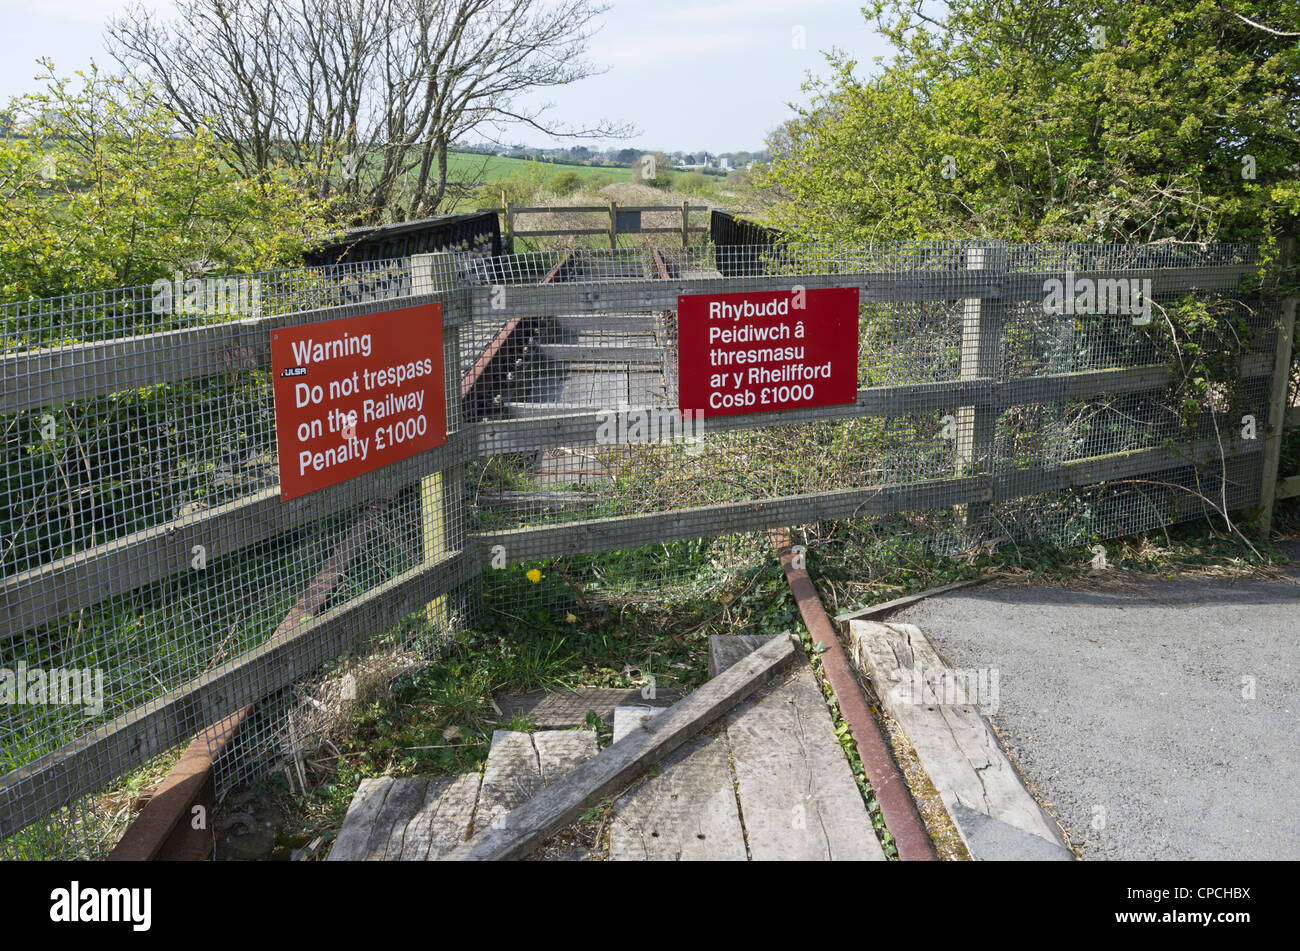 Anglesey Central Railway disused line from Gaerwen to Amlwch is due to reopen by end of 2012 with 'do not trespass' warning sign Stock Photo